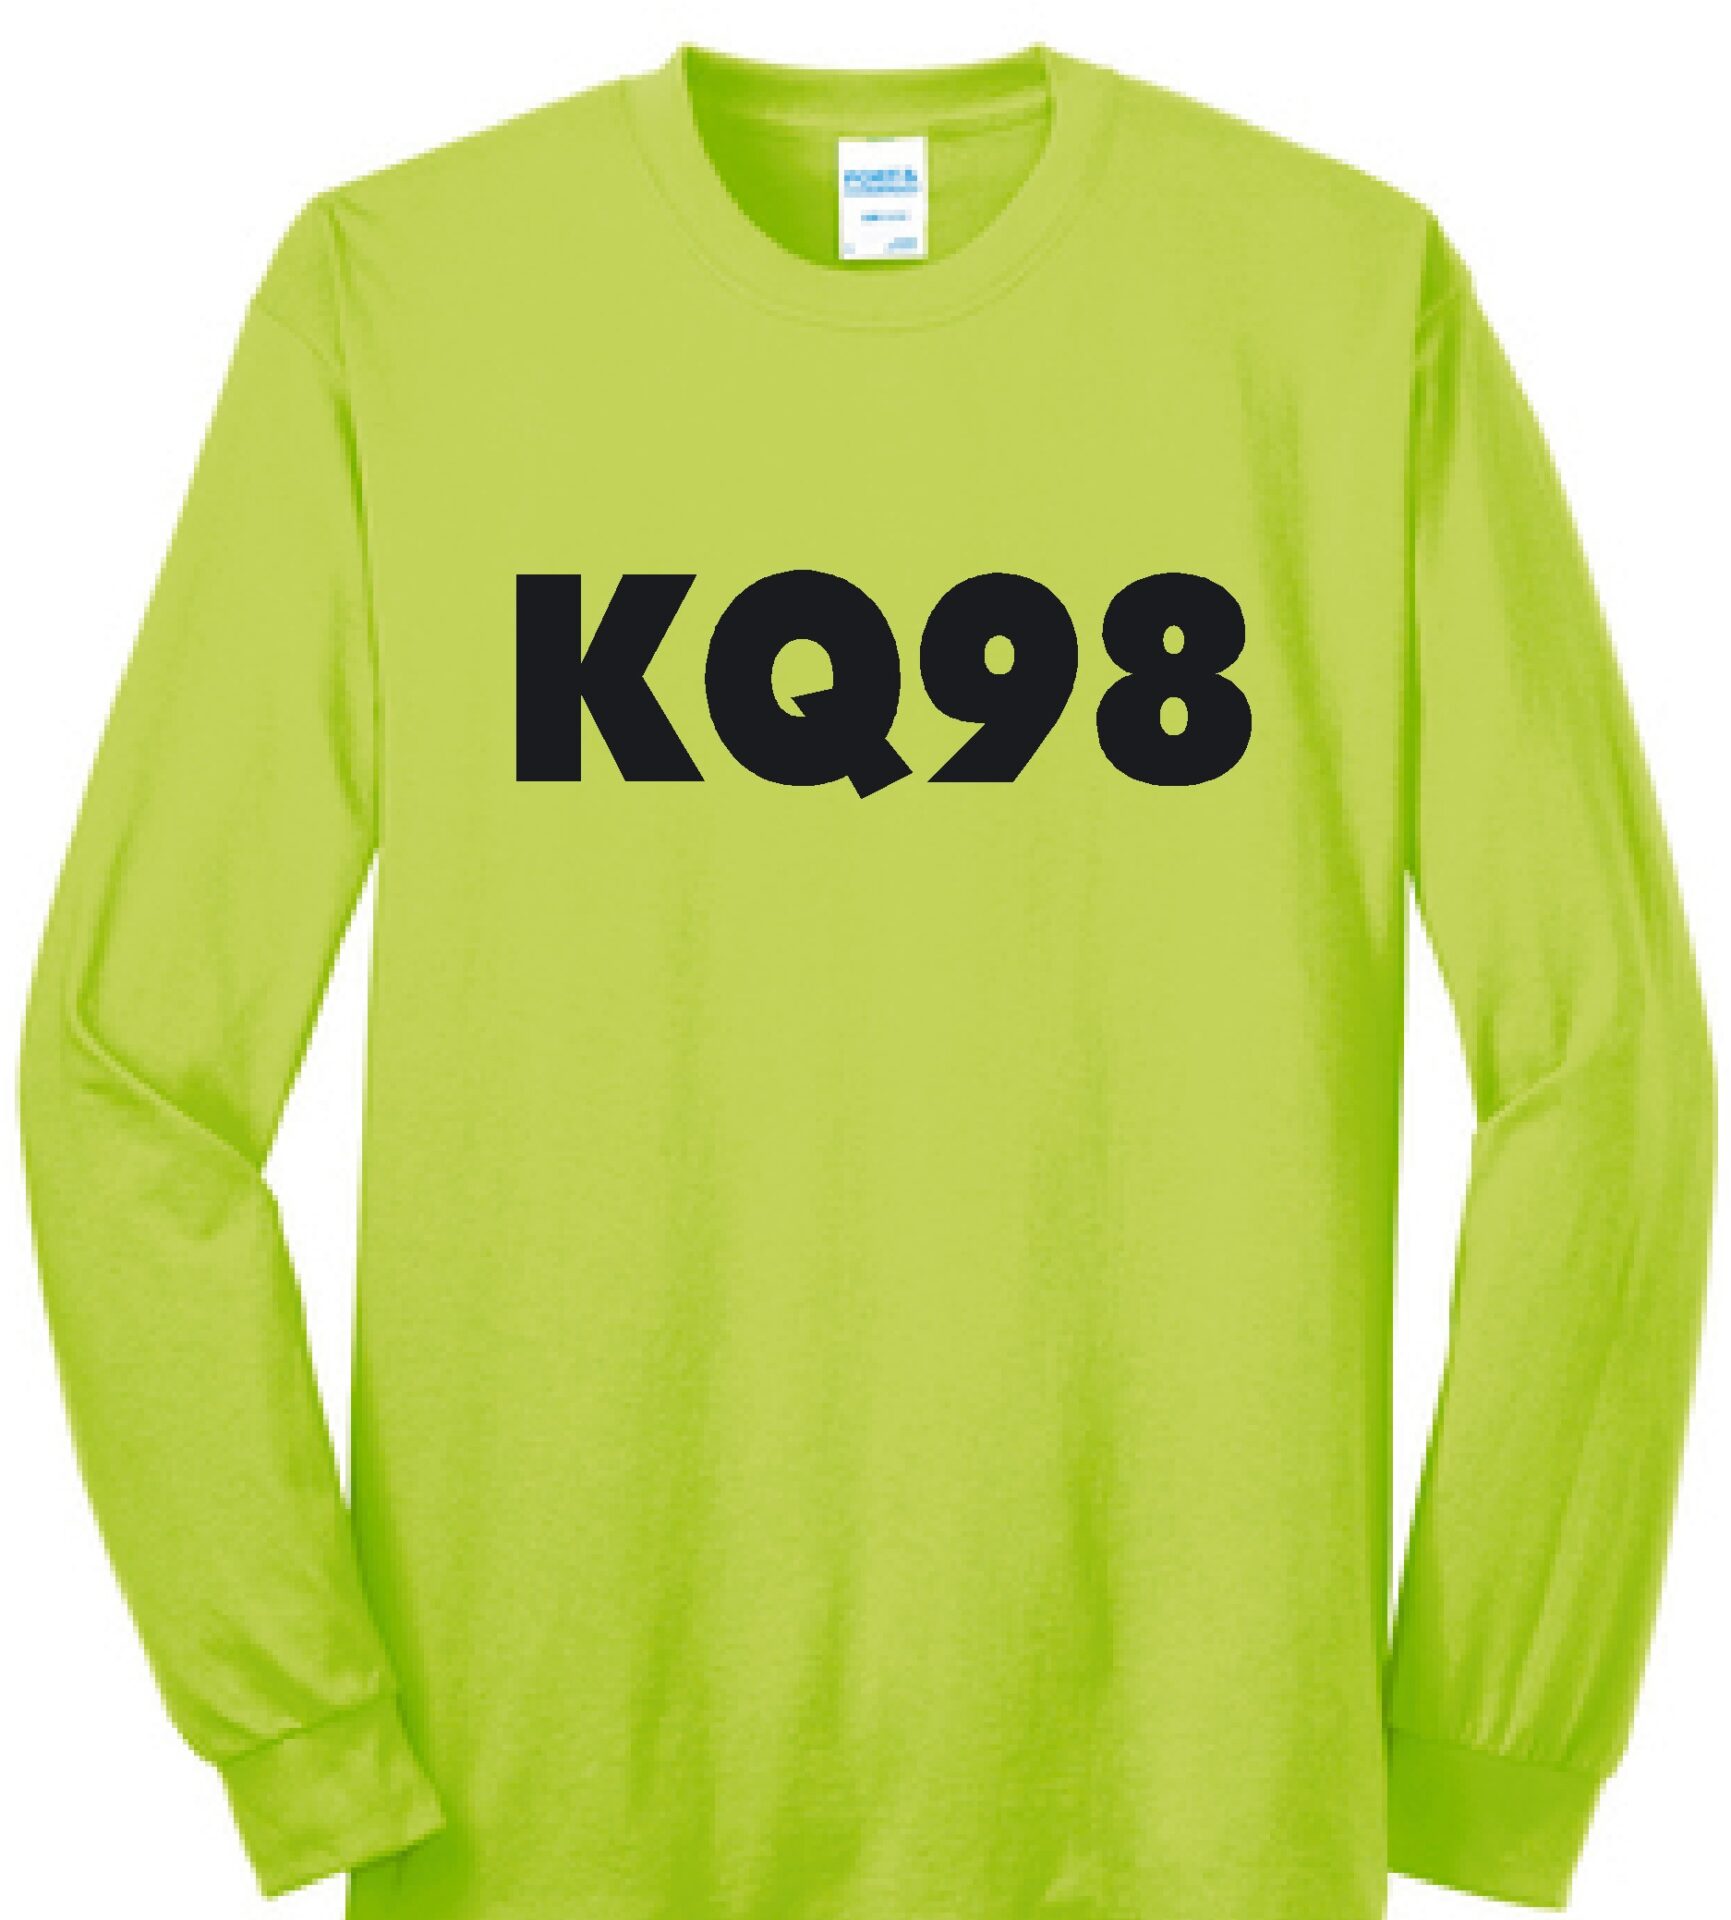 KQ98 in black letters on a safety yellow long sleeve shirt